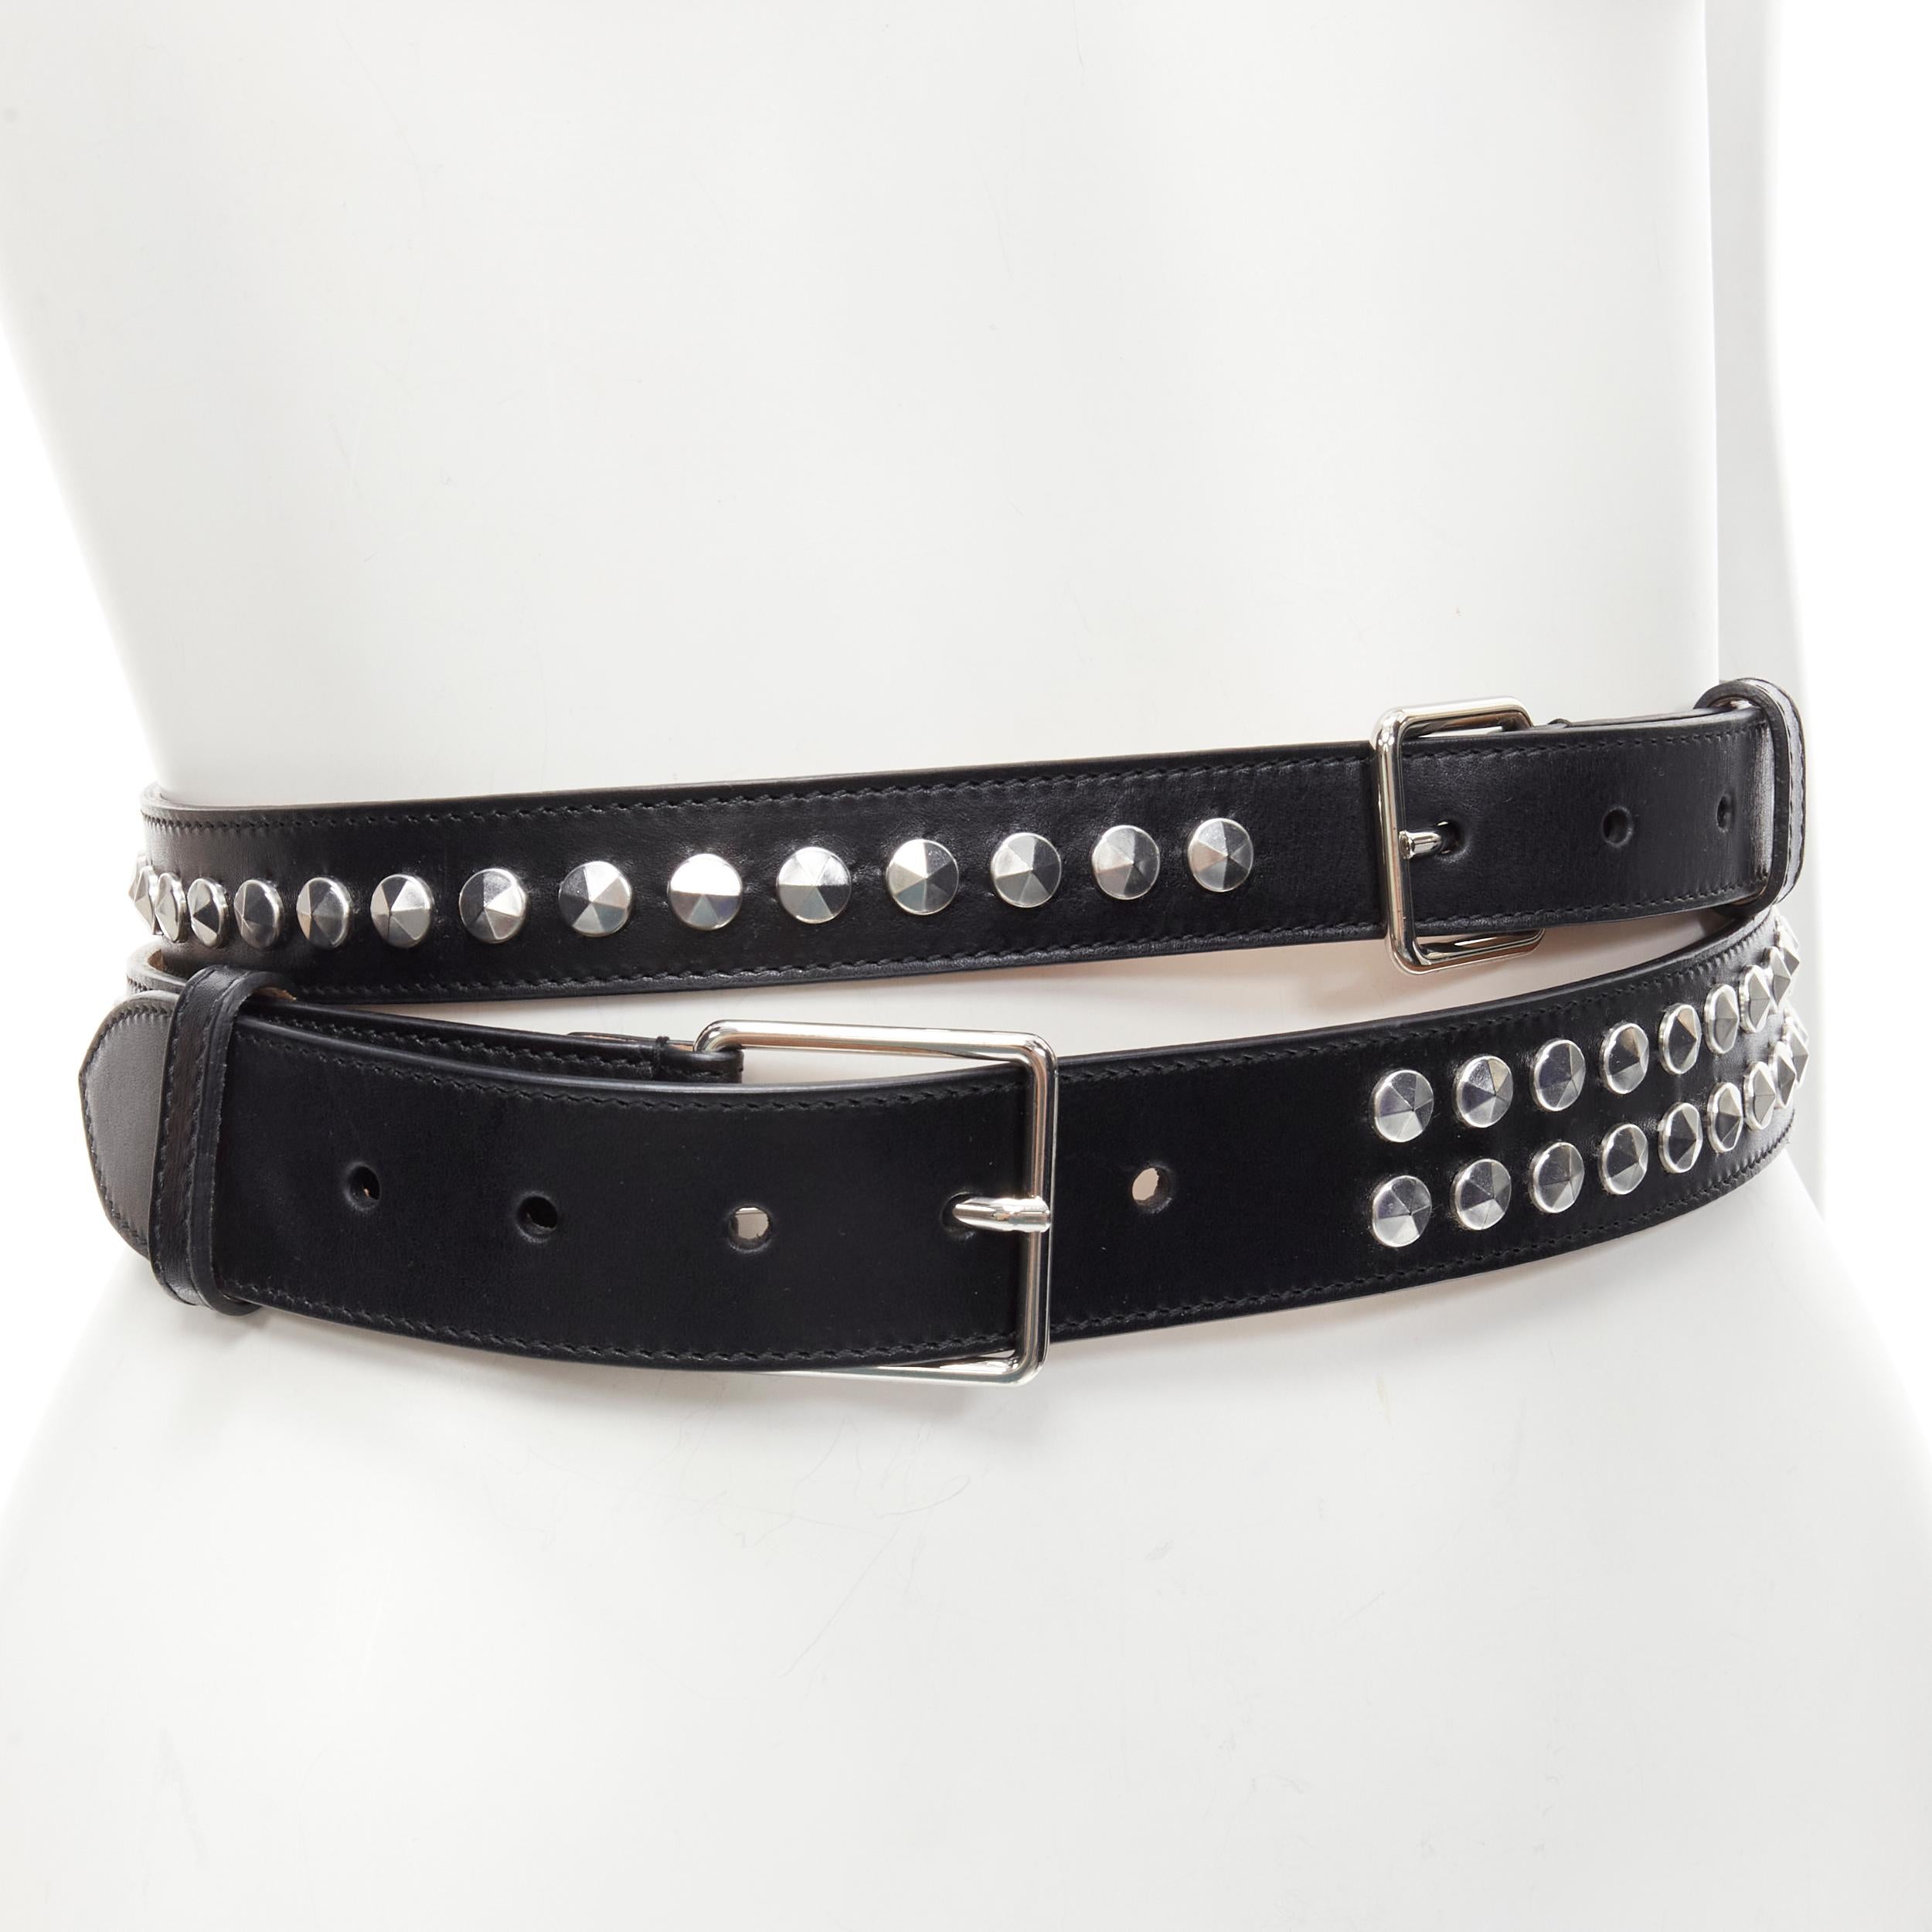 ALEXANDER MCQUEEN black leather silver punk studded double wrap belt 75cm
Brand: Alexander McQueen
Extra Detail: Black leather with silver-tone studs.

CONDITION:
Condition: Excellent, this item was pre-owned and is in excellent condition. 
Comes